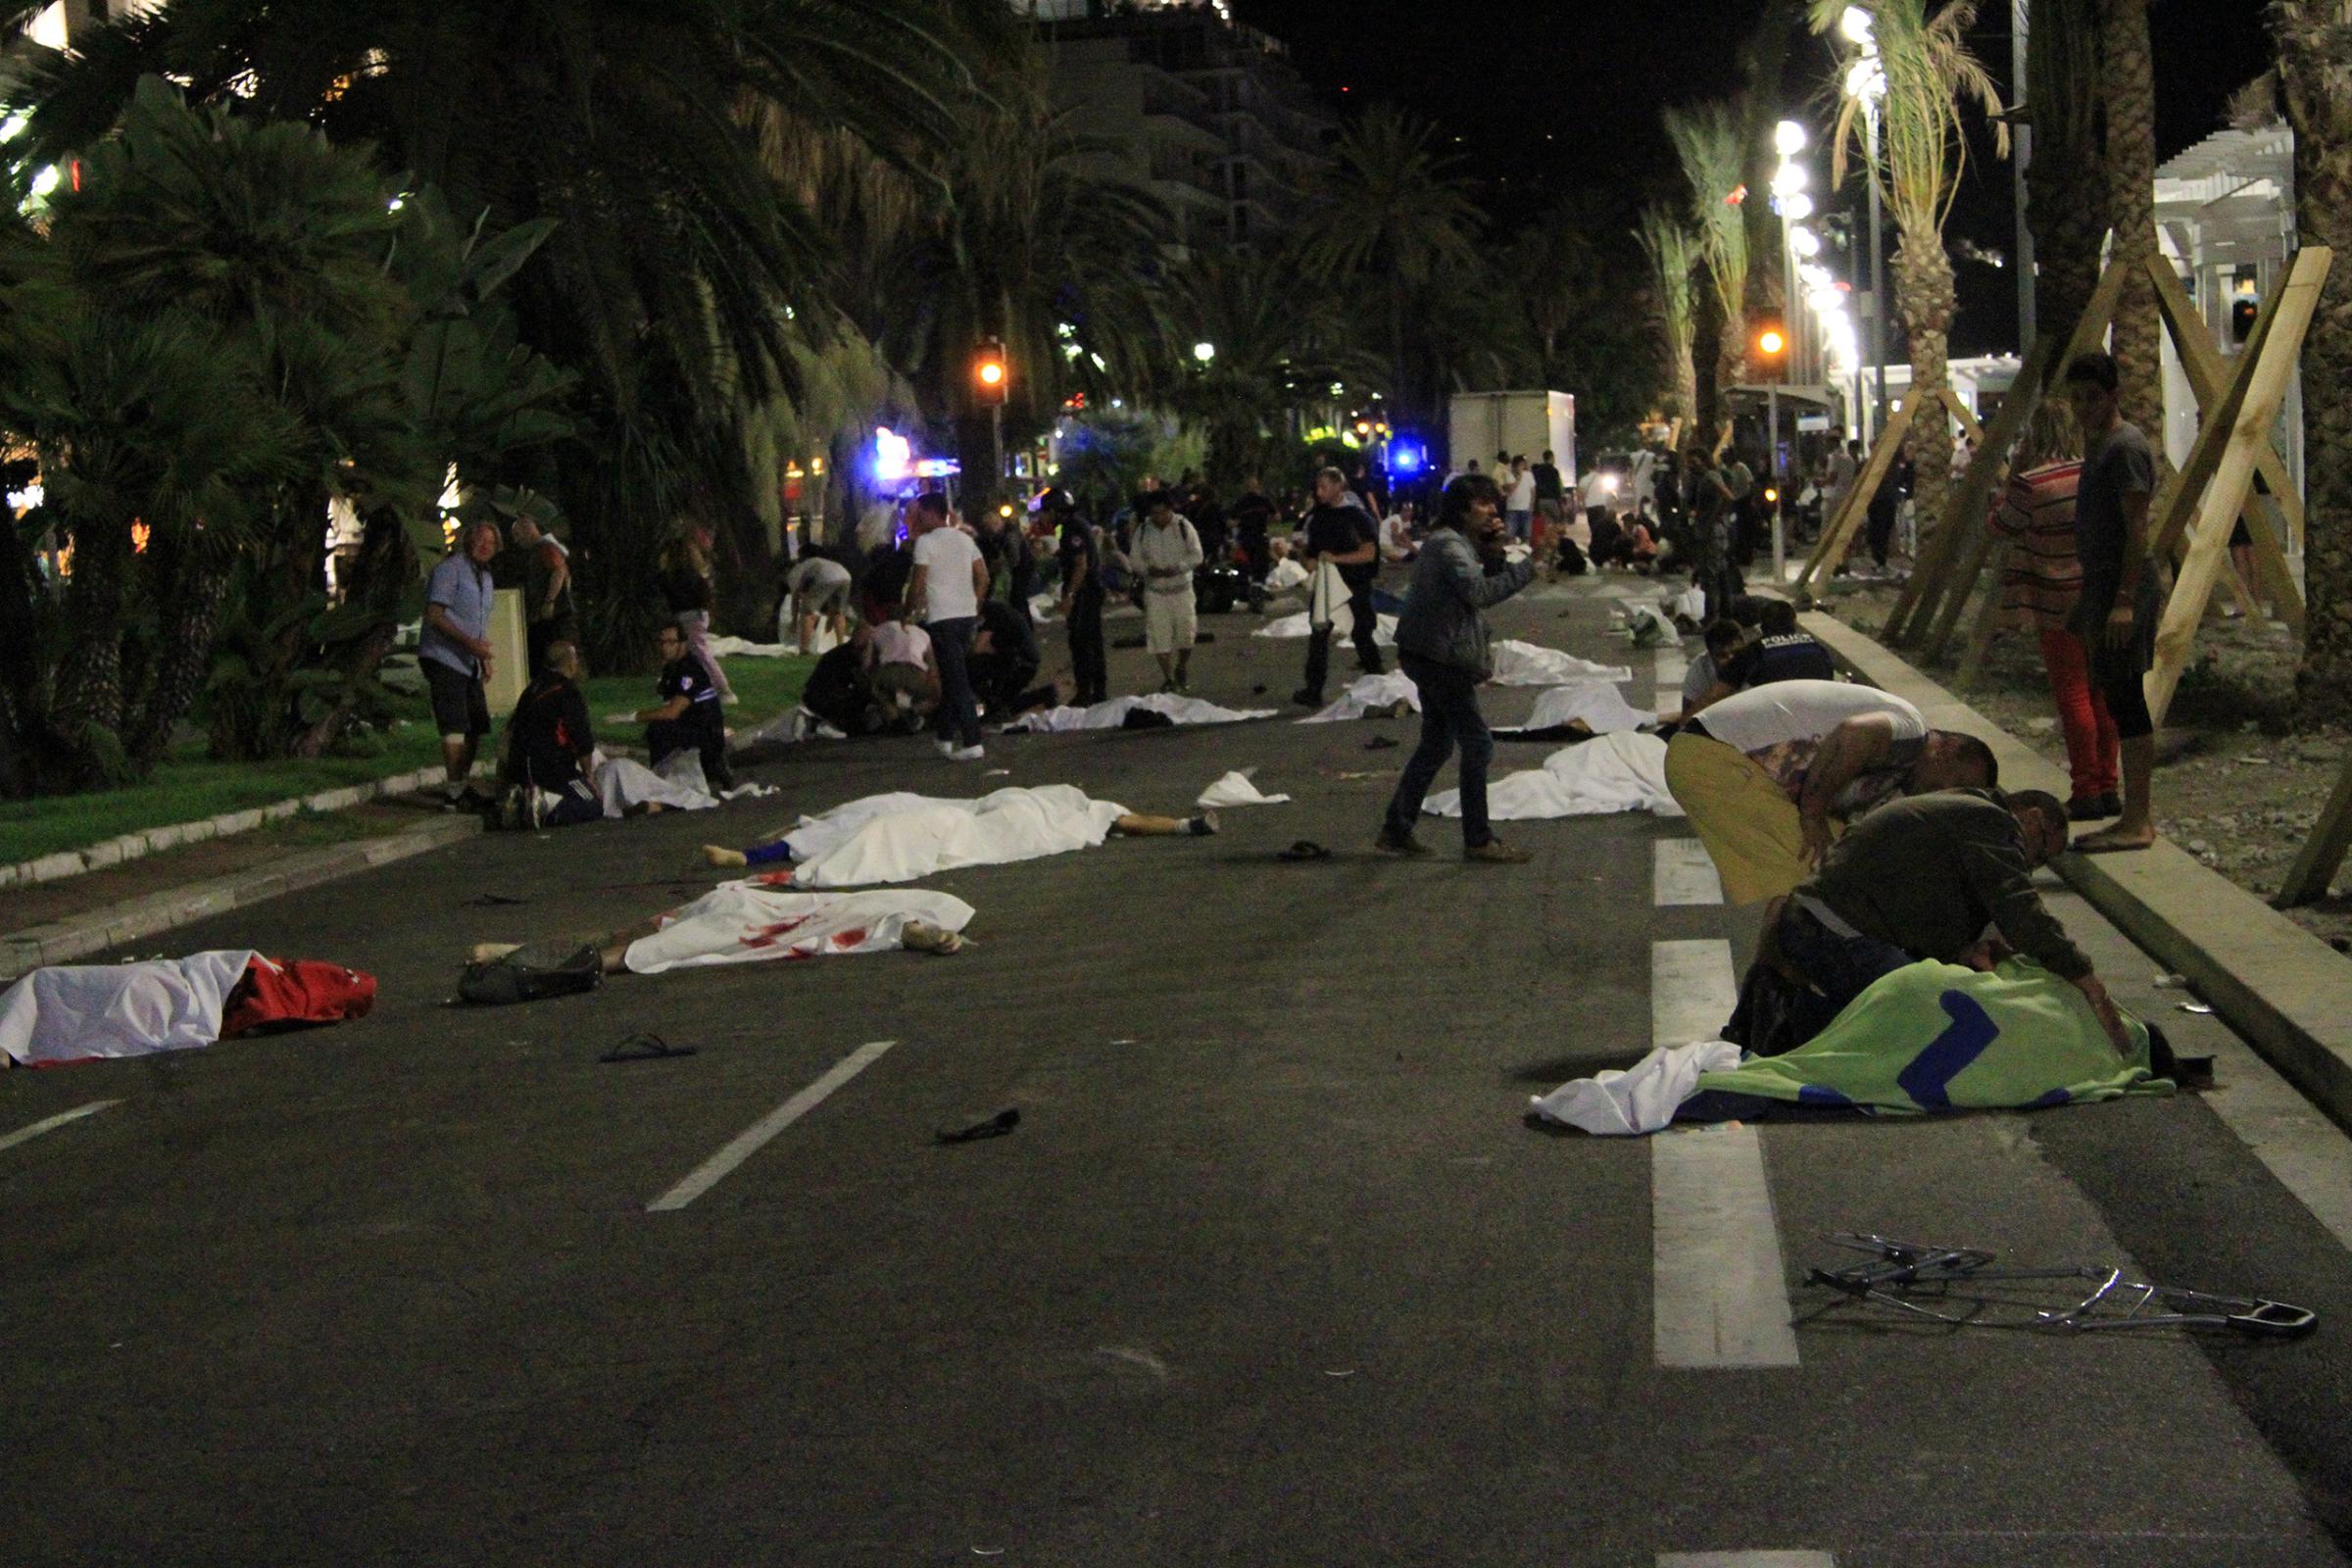 Bodies lie in the streets of Nice, France, after a terrorist attack that left at least 77 dead and dozens injured on July 14, 2016.